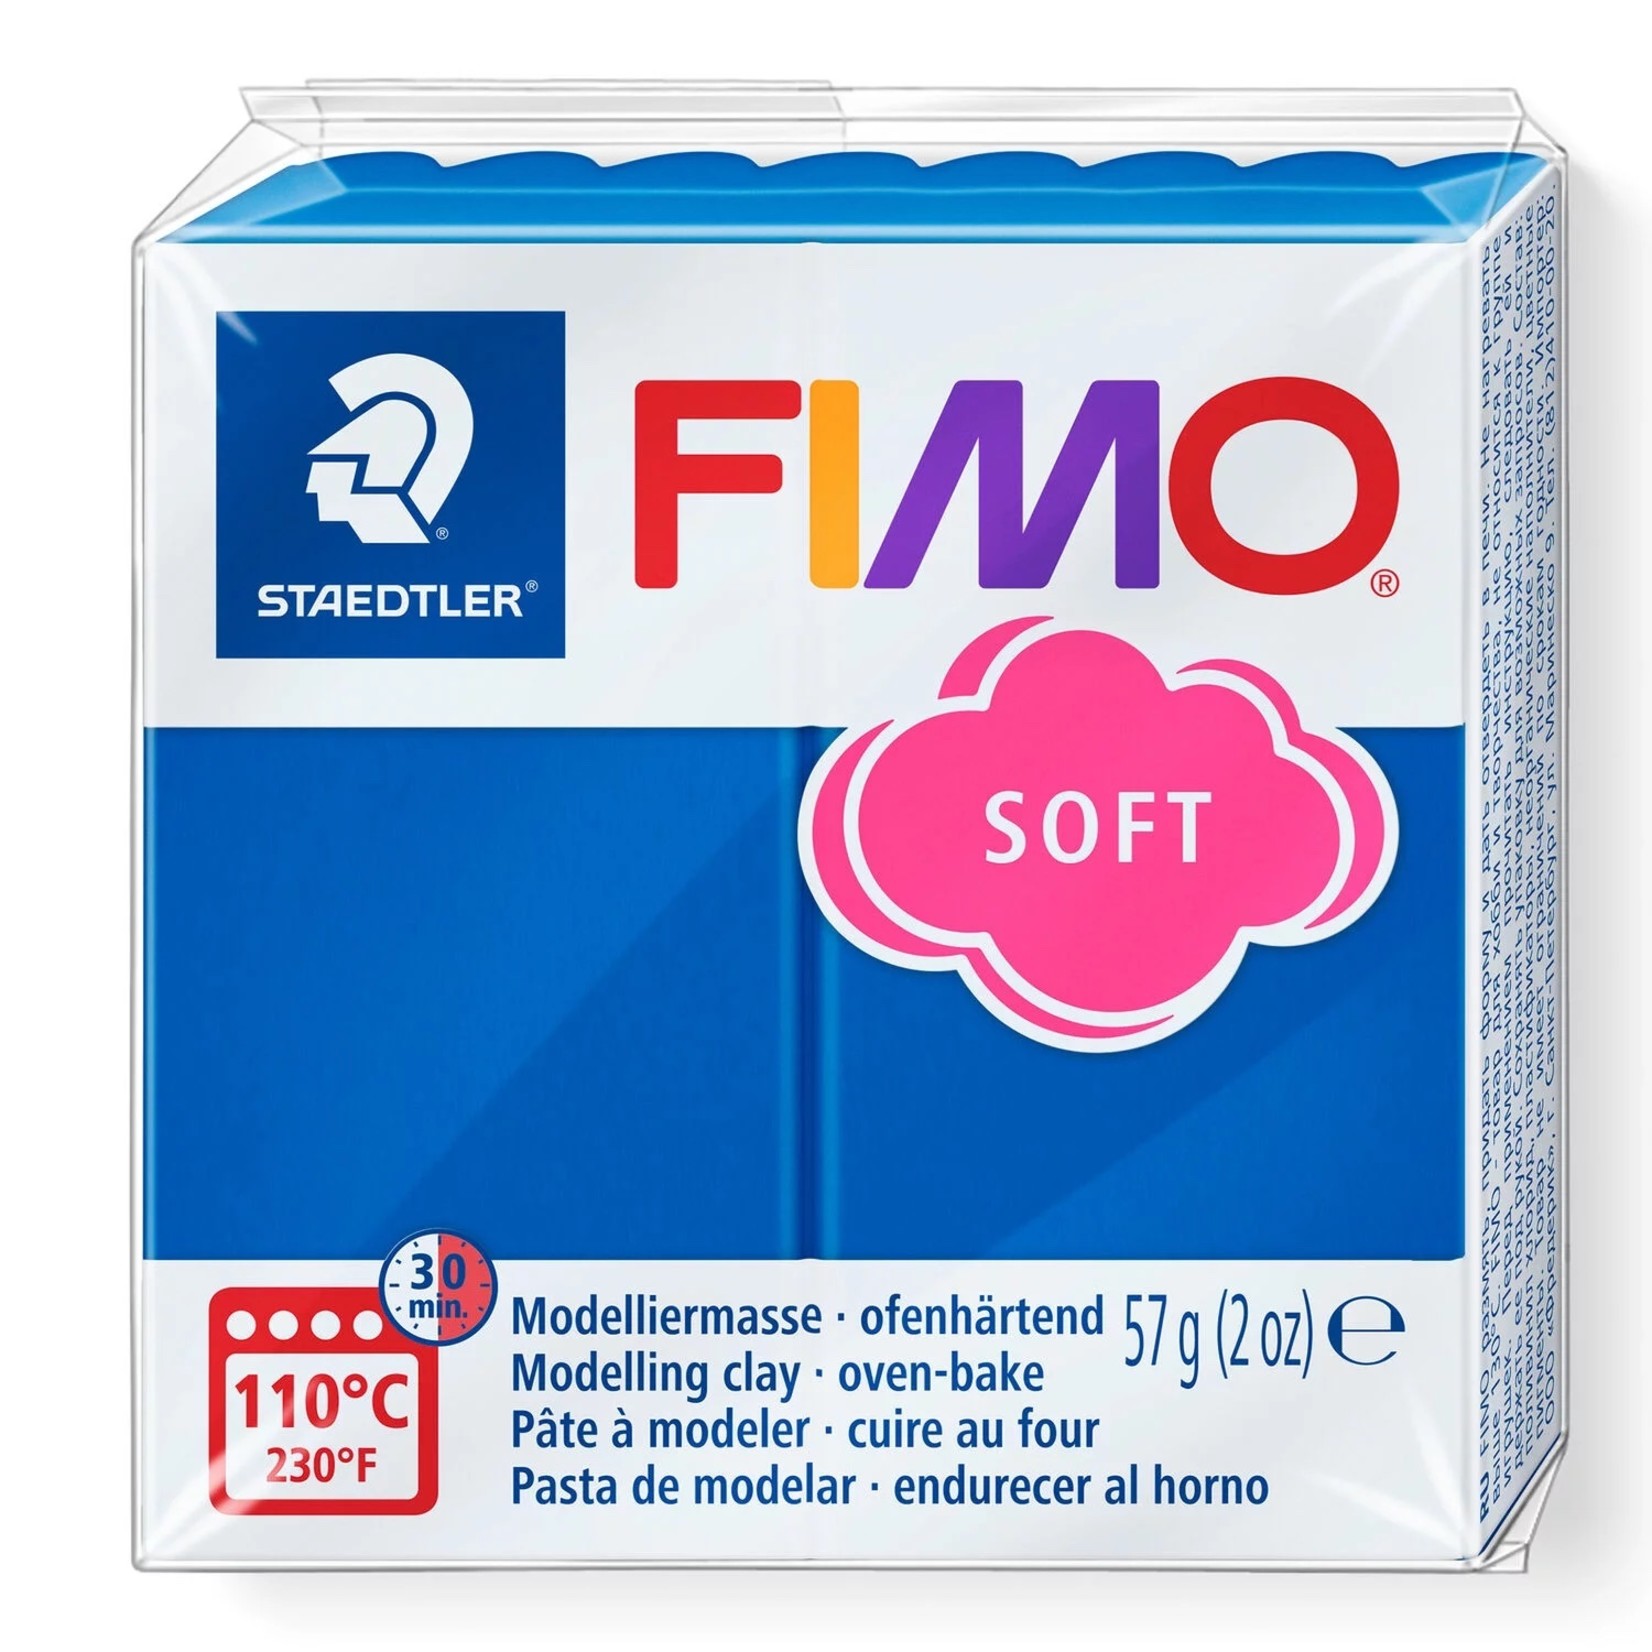 STAEDTLER FIMO SOFT 37 PACIFIC BLUE